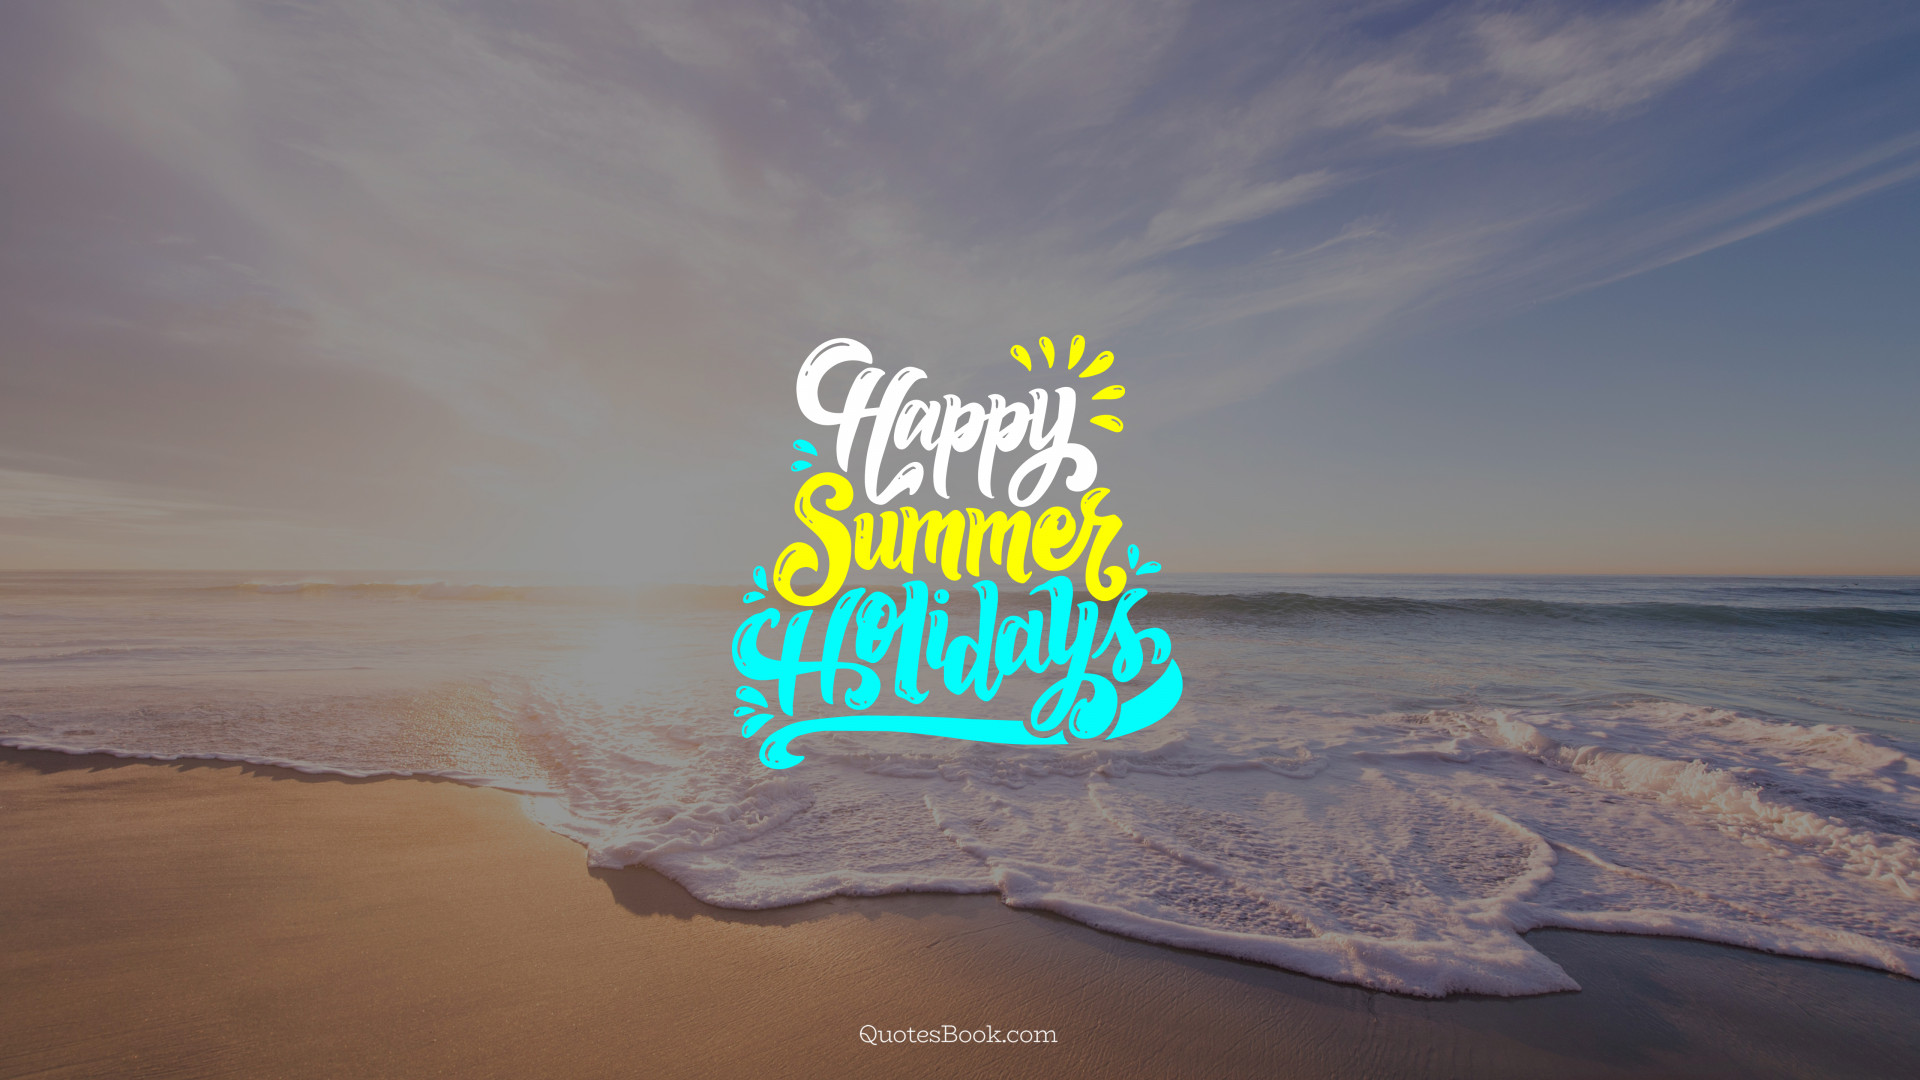 Happy summer holidays - QuotesBook